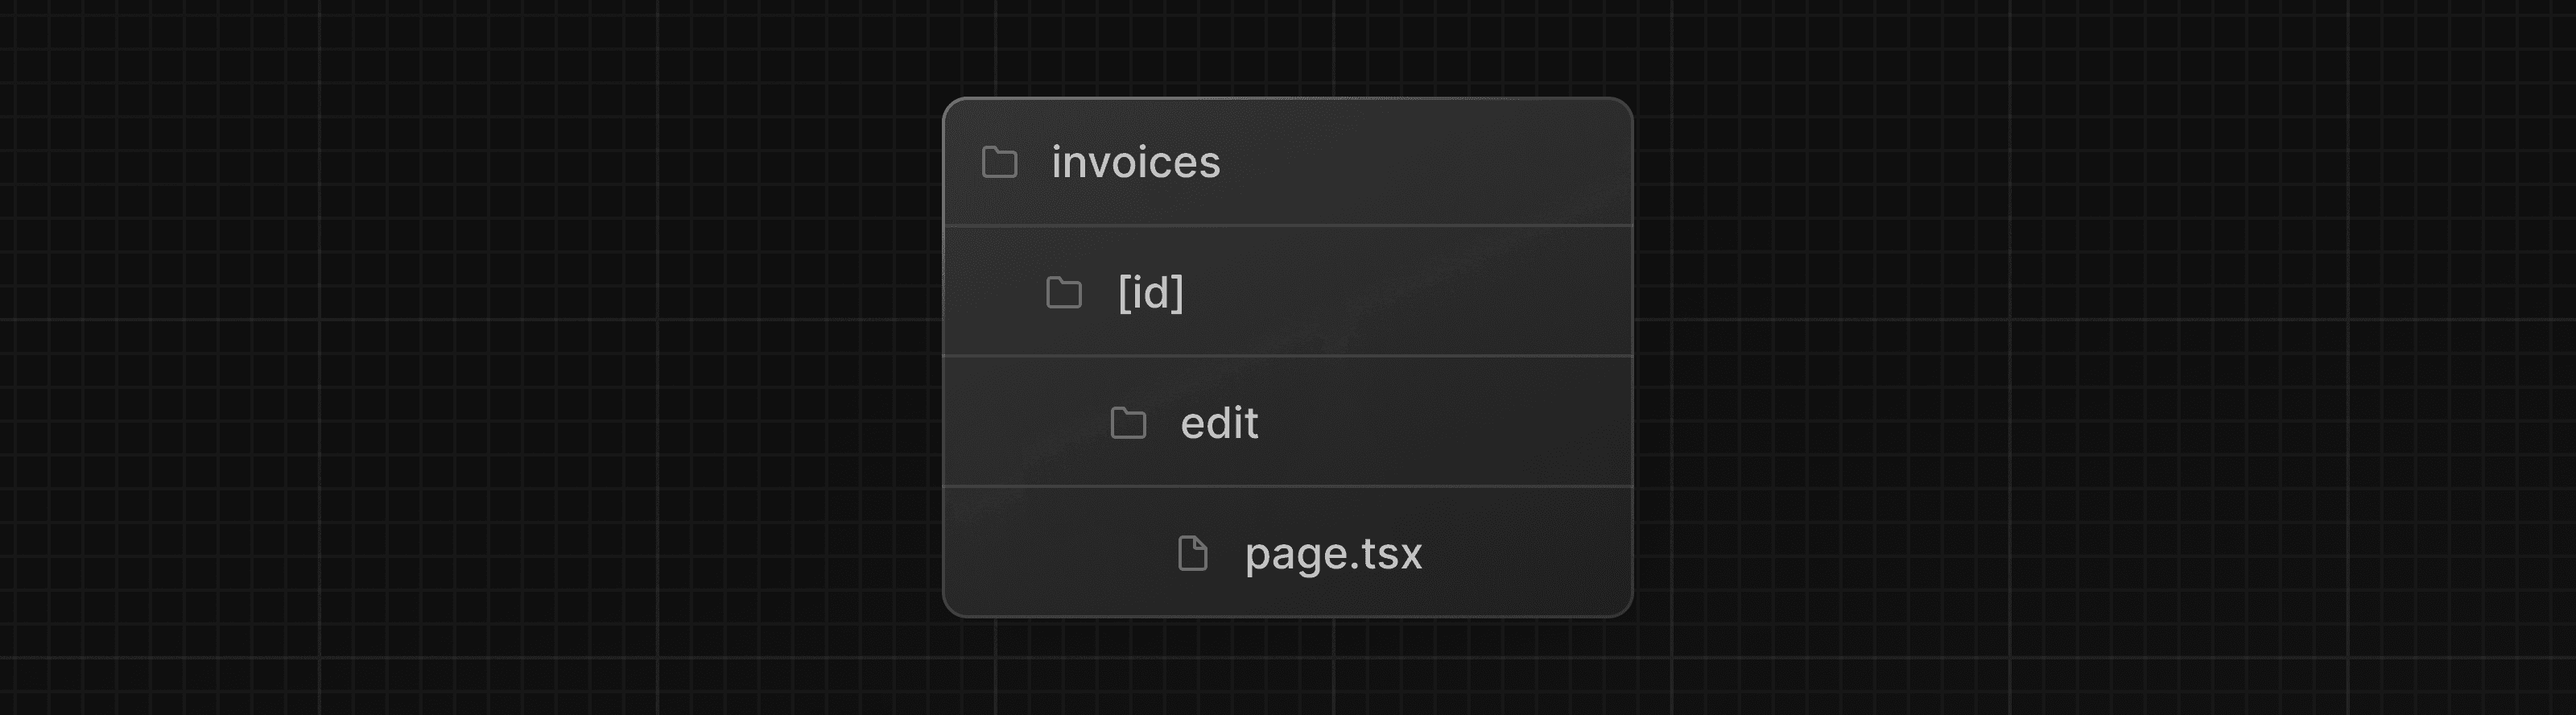 Invoices folder with a nested [id] folder, and an edit folder inside it